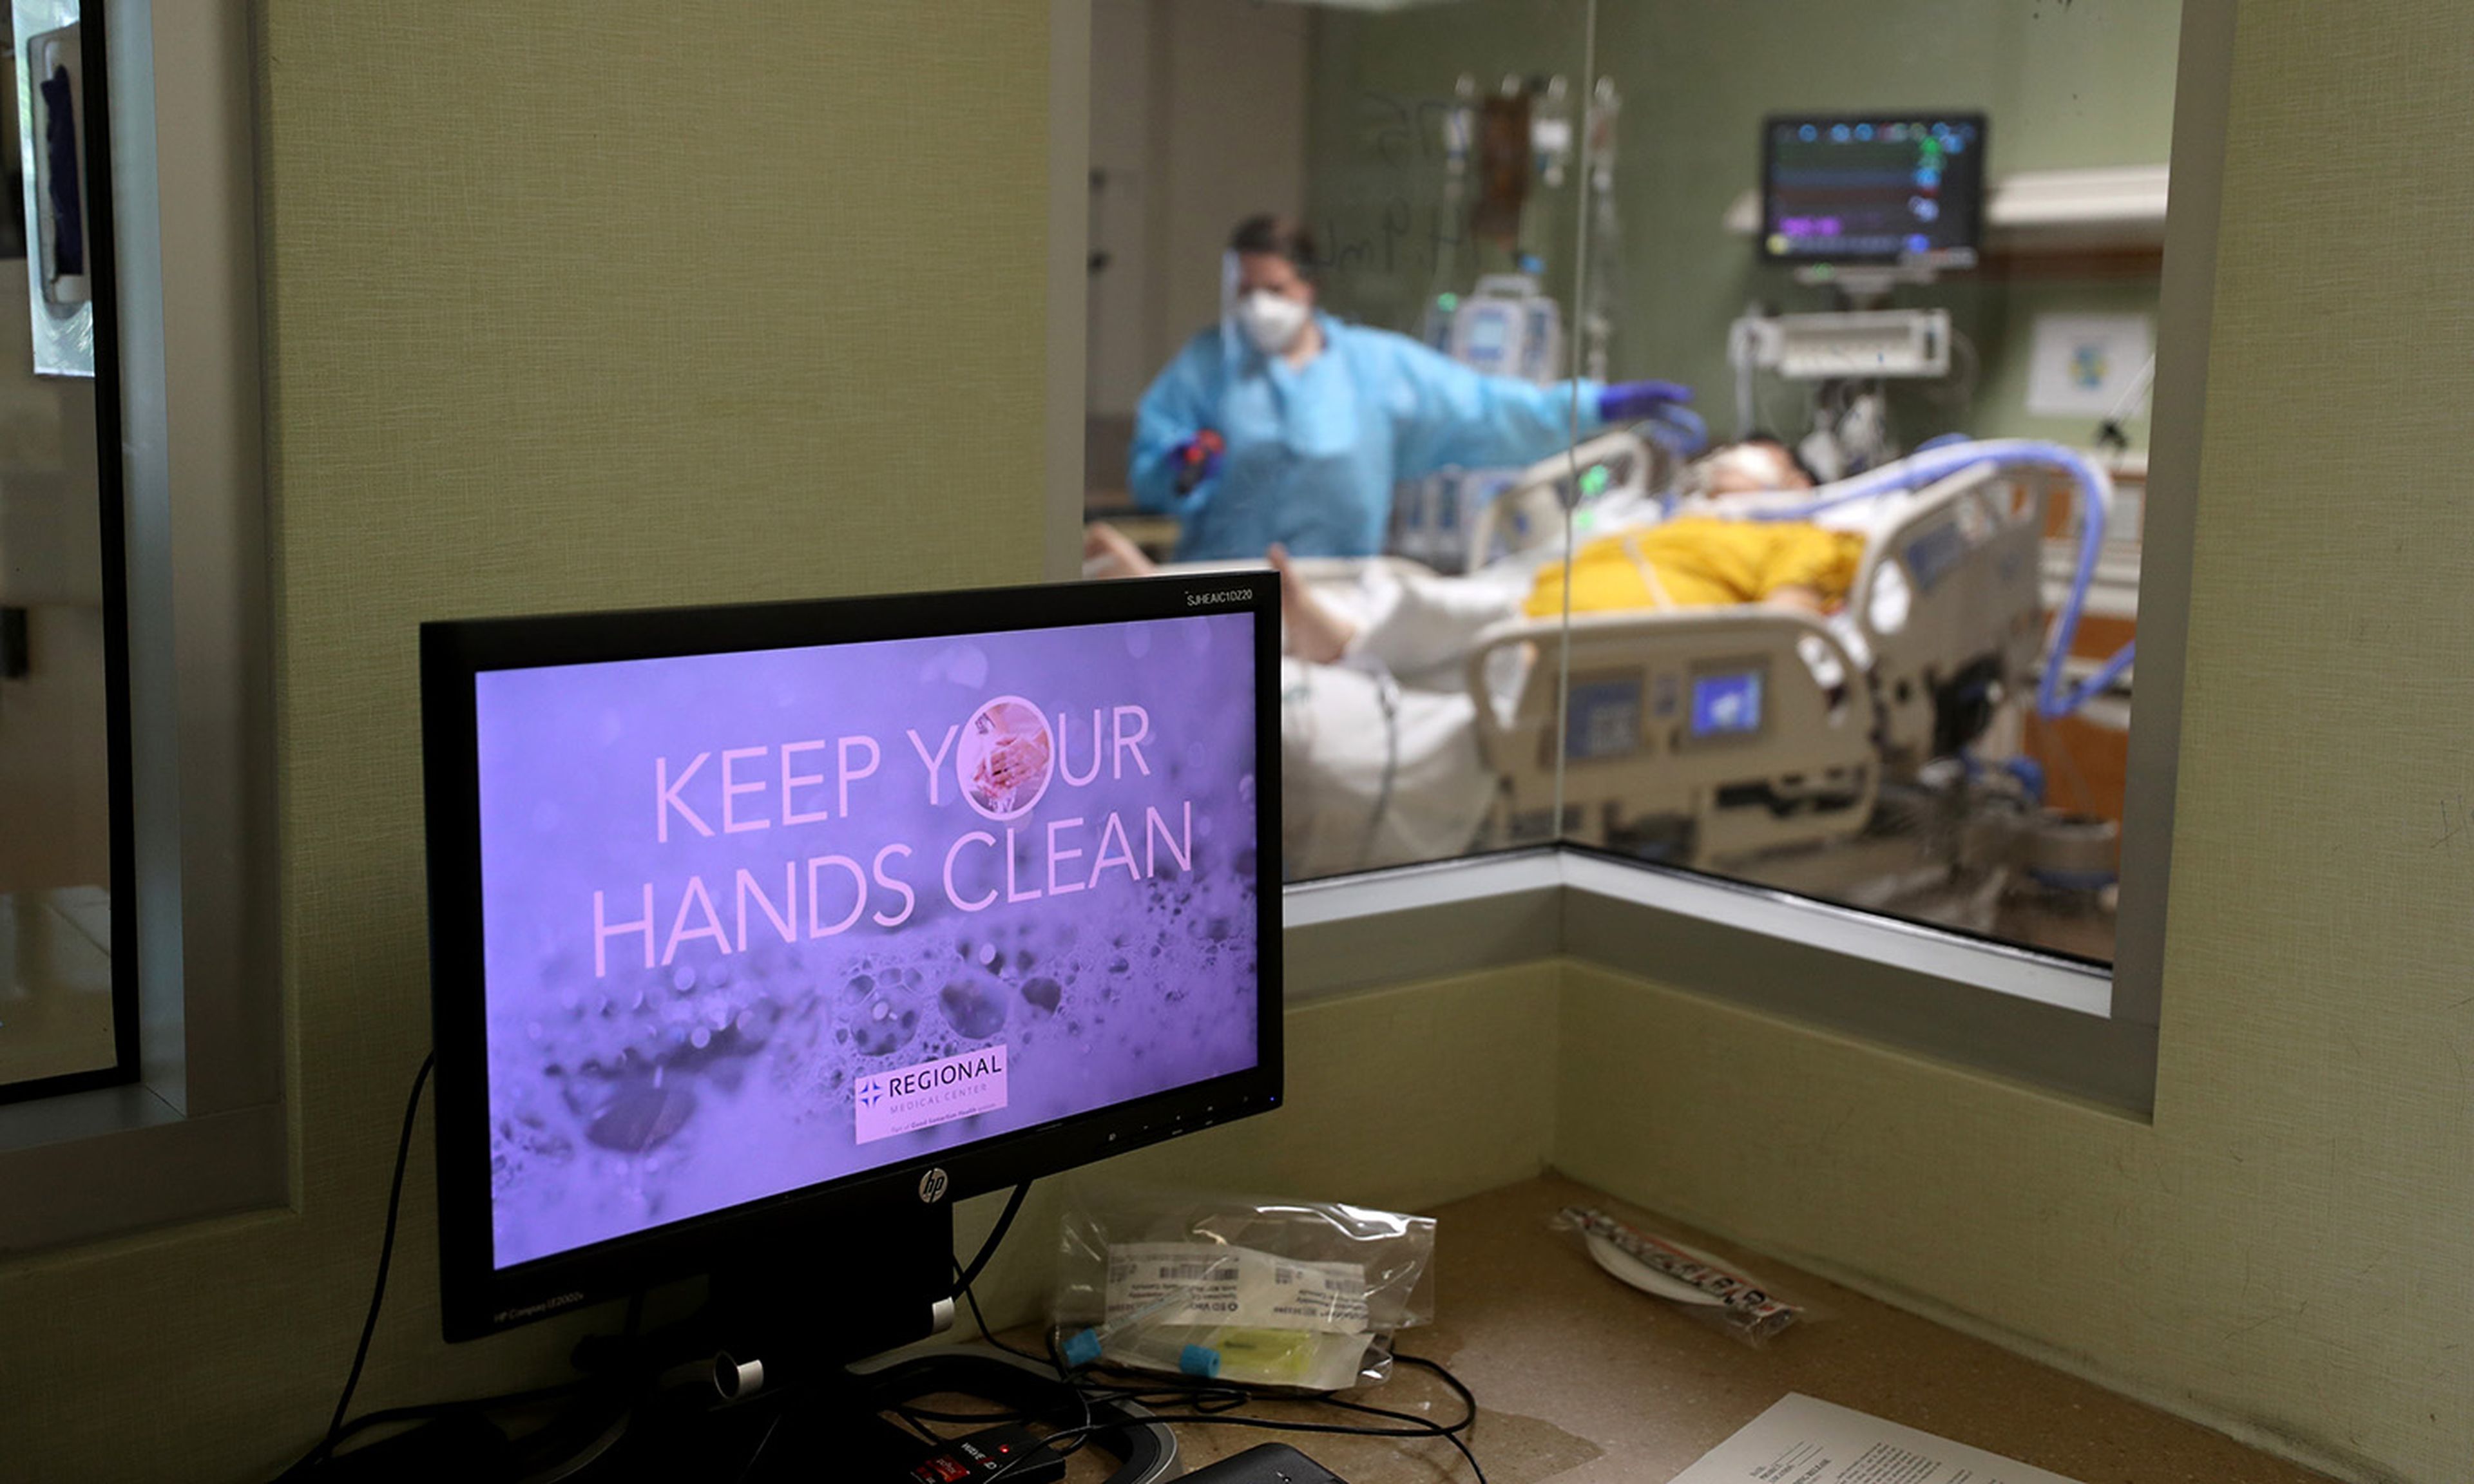 A message about hand-washing is displayed on a computer monitor in the intensive care unit at Regional Medical Center on May 21, 2020, in San Jose, Calif. (Photo by Justin Sullivan/Getty Images)